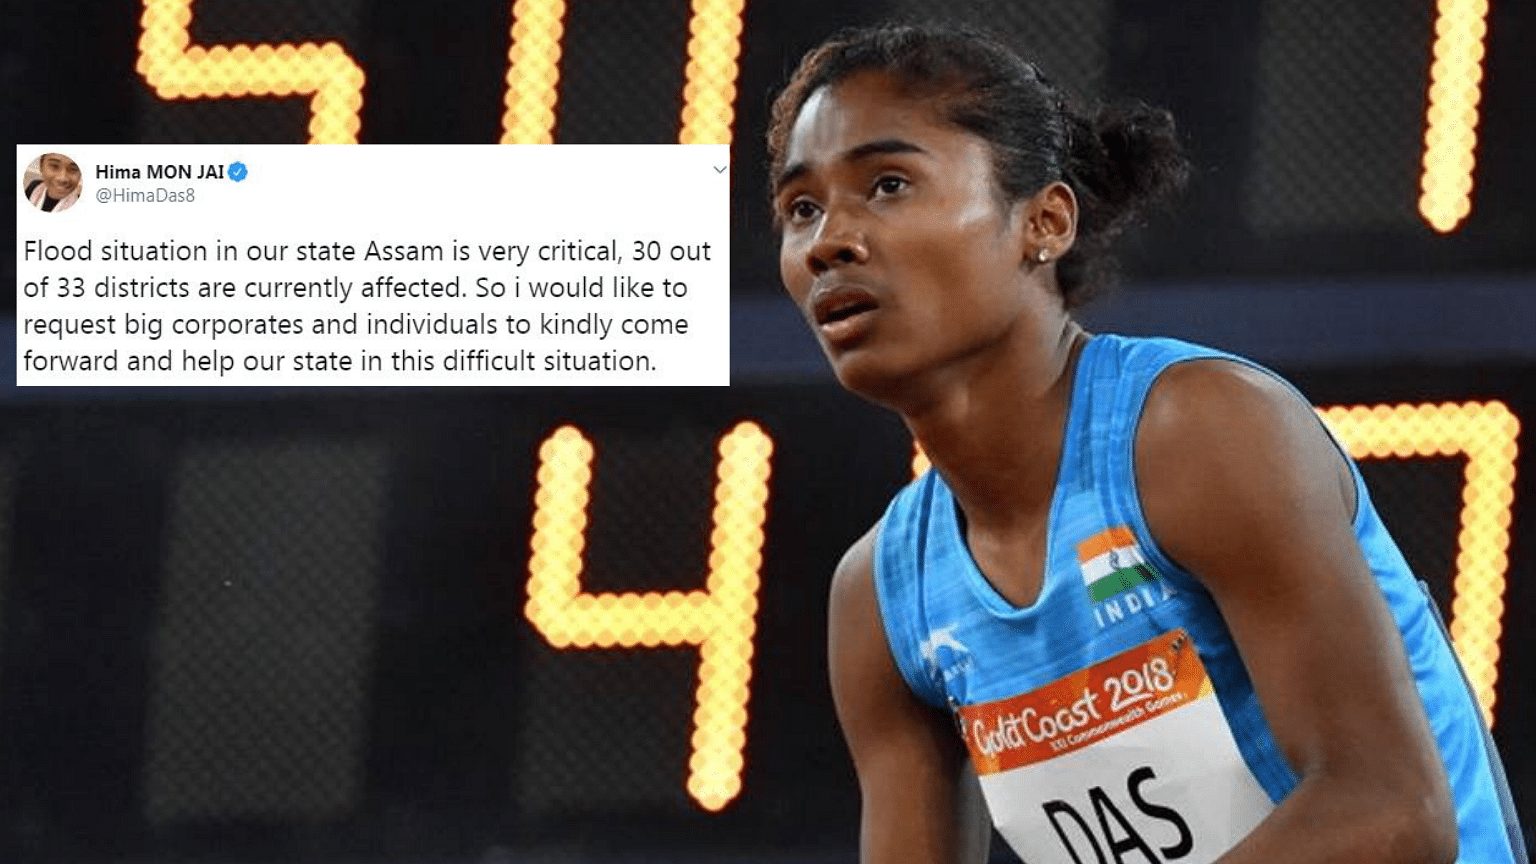 The reigning World Youth Athletic champion Hima Das hails from Dhing in Assam